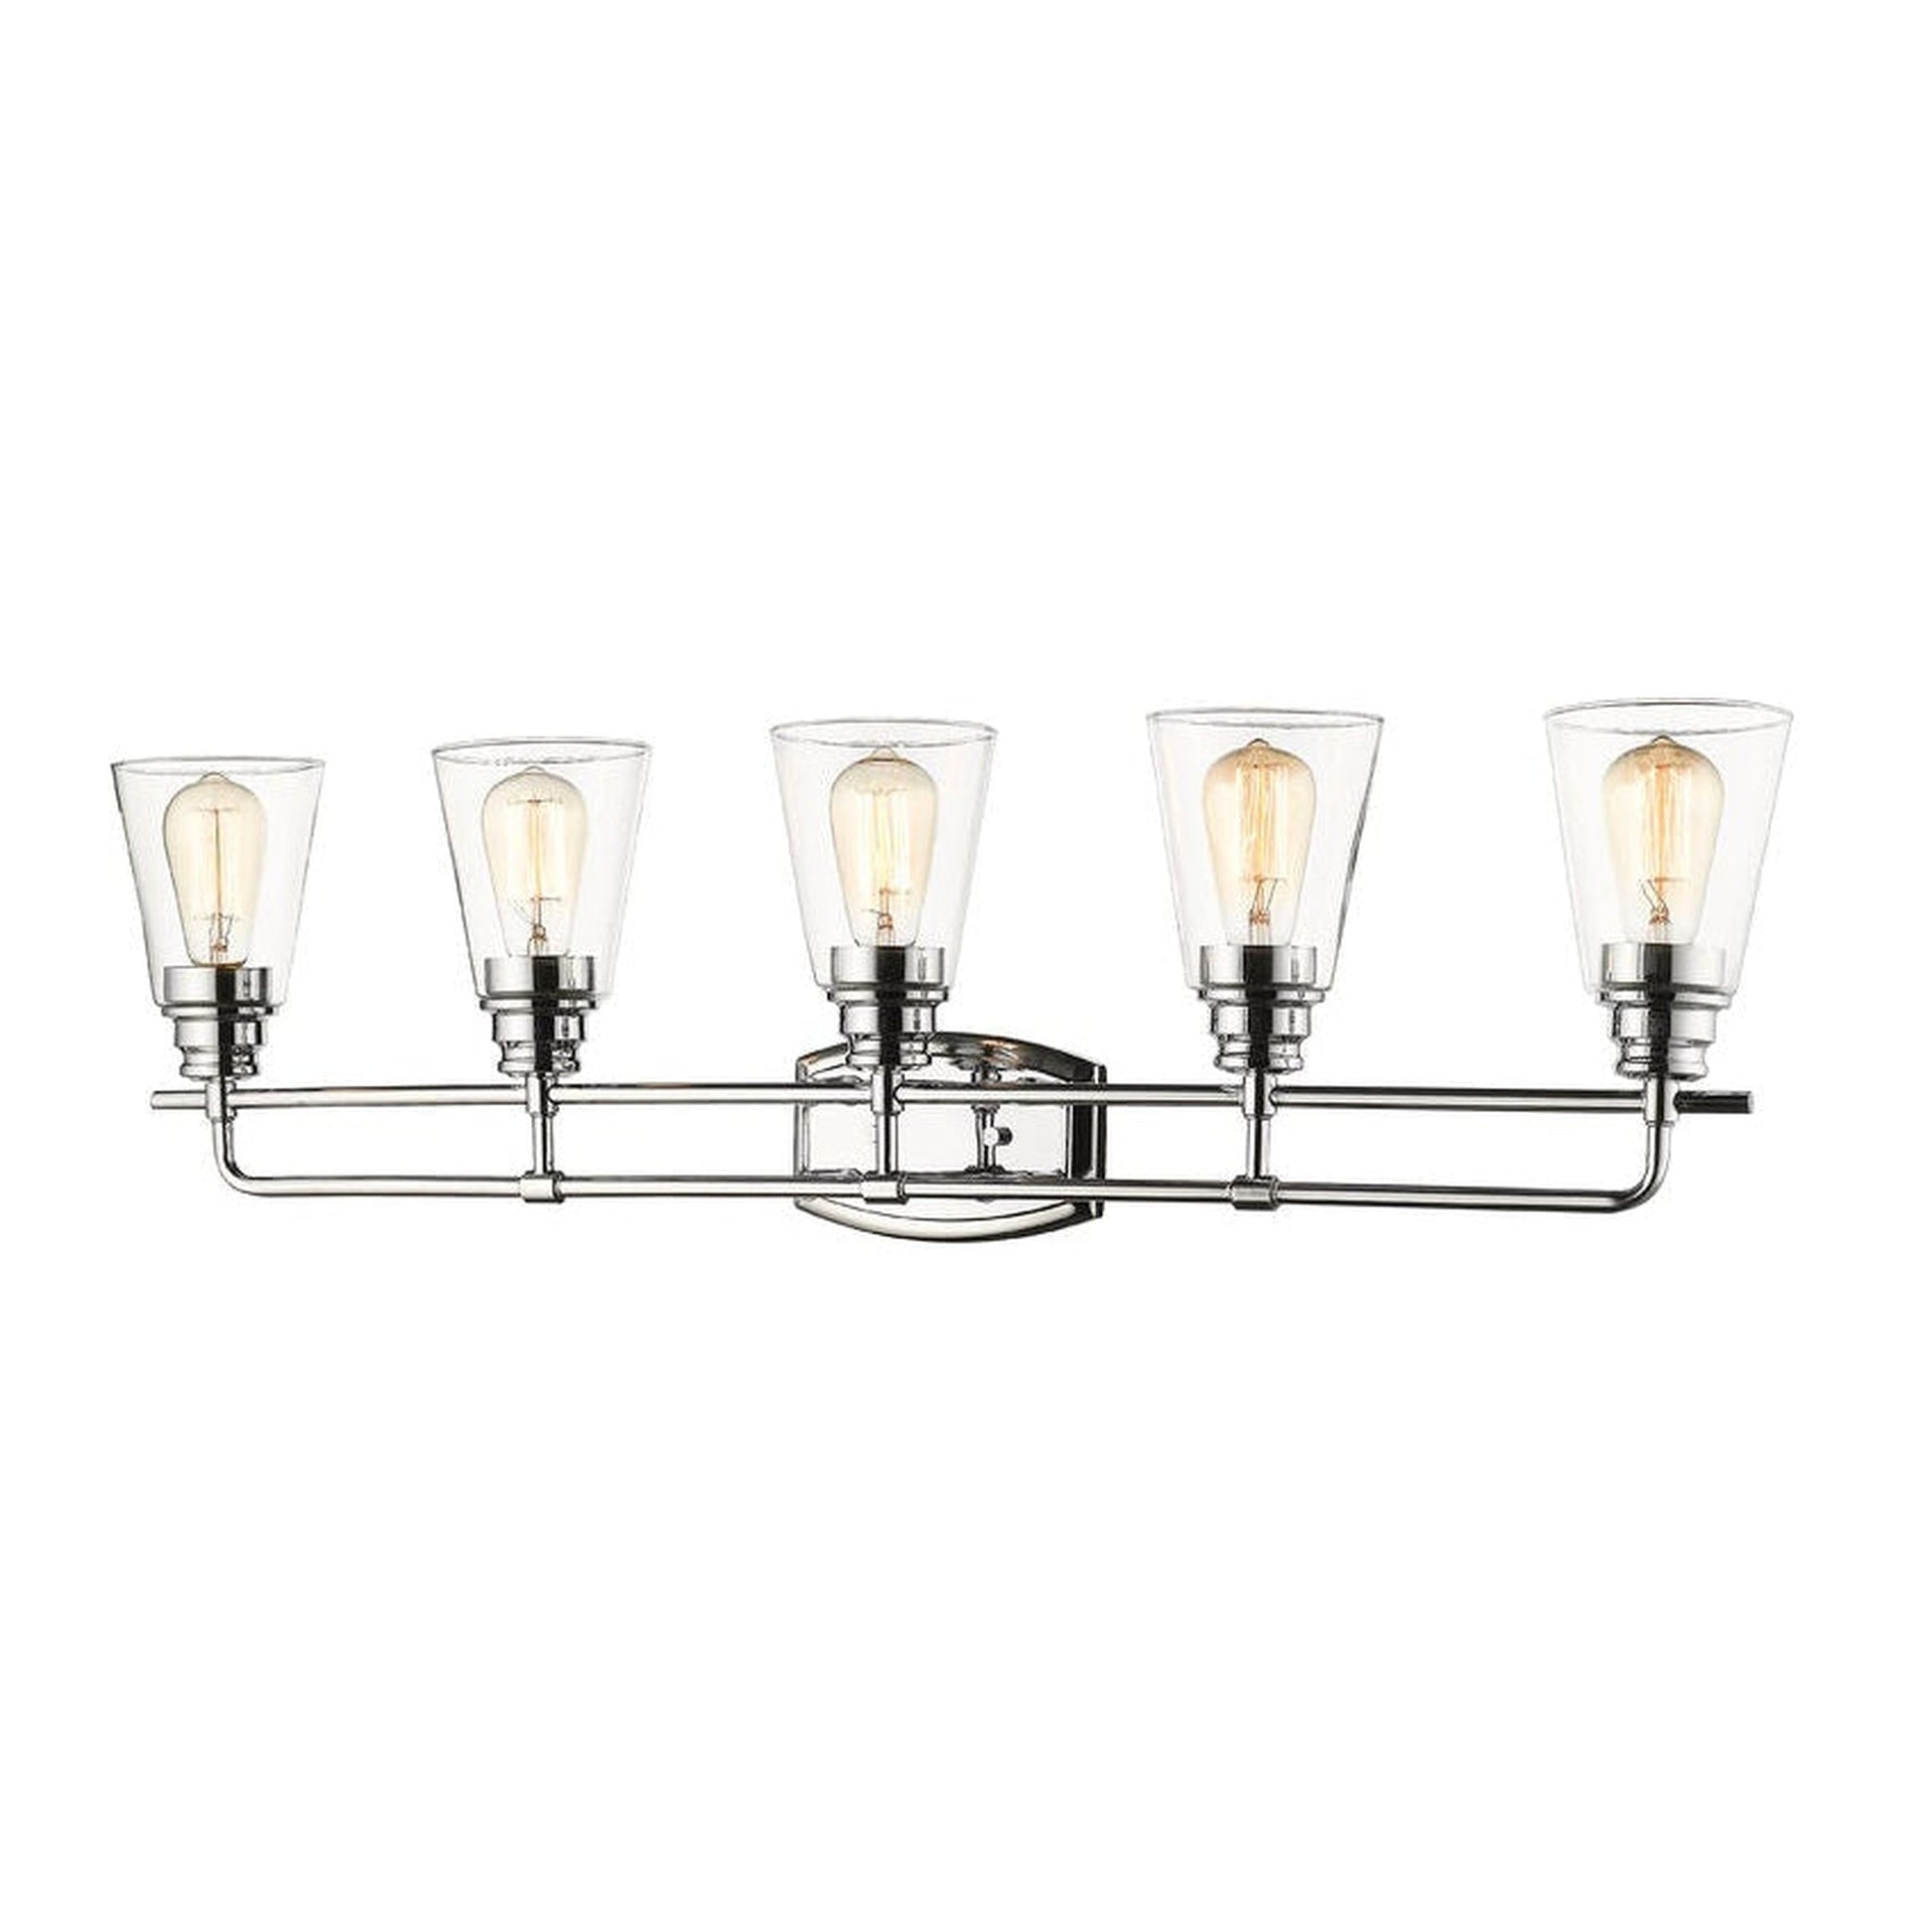 Z-Lite Annora 37" 5-Light Chrome Vanity Light With Clear Glass Shade